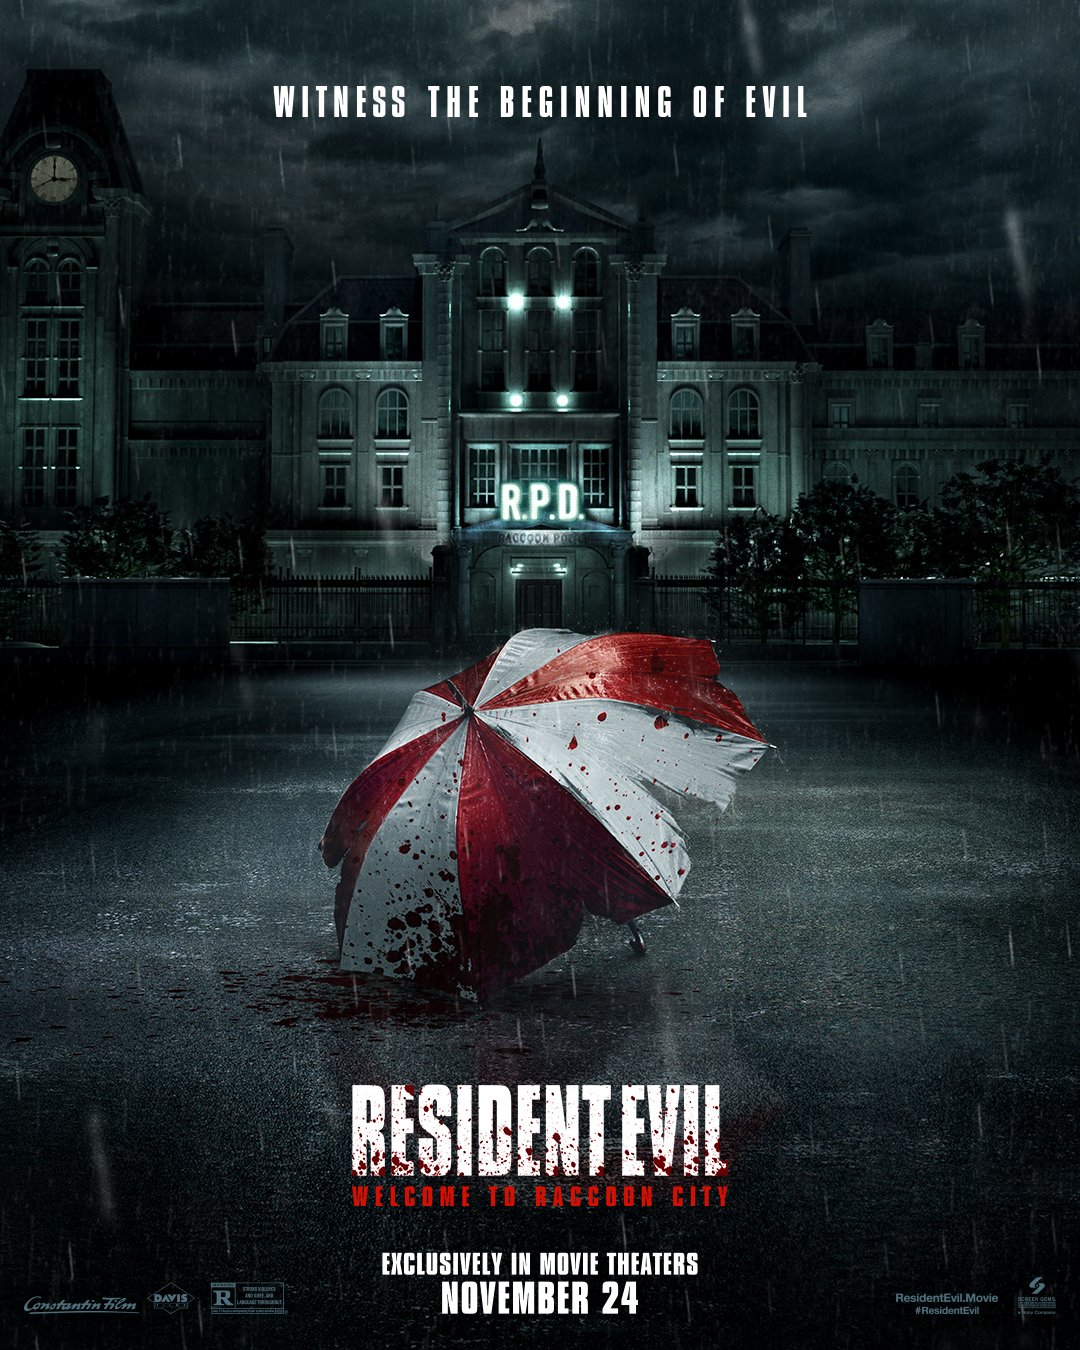 The theatrical movie poster for the upcoming Resident Evil: Welcome to Raccoon City live-action film, featuring a tattered white and red umbrella laying ominiously in front of a spooky mansion on a rain-filled night.